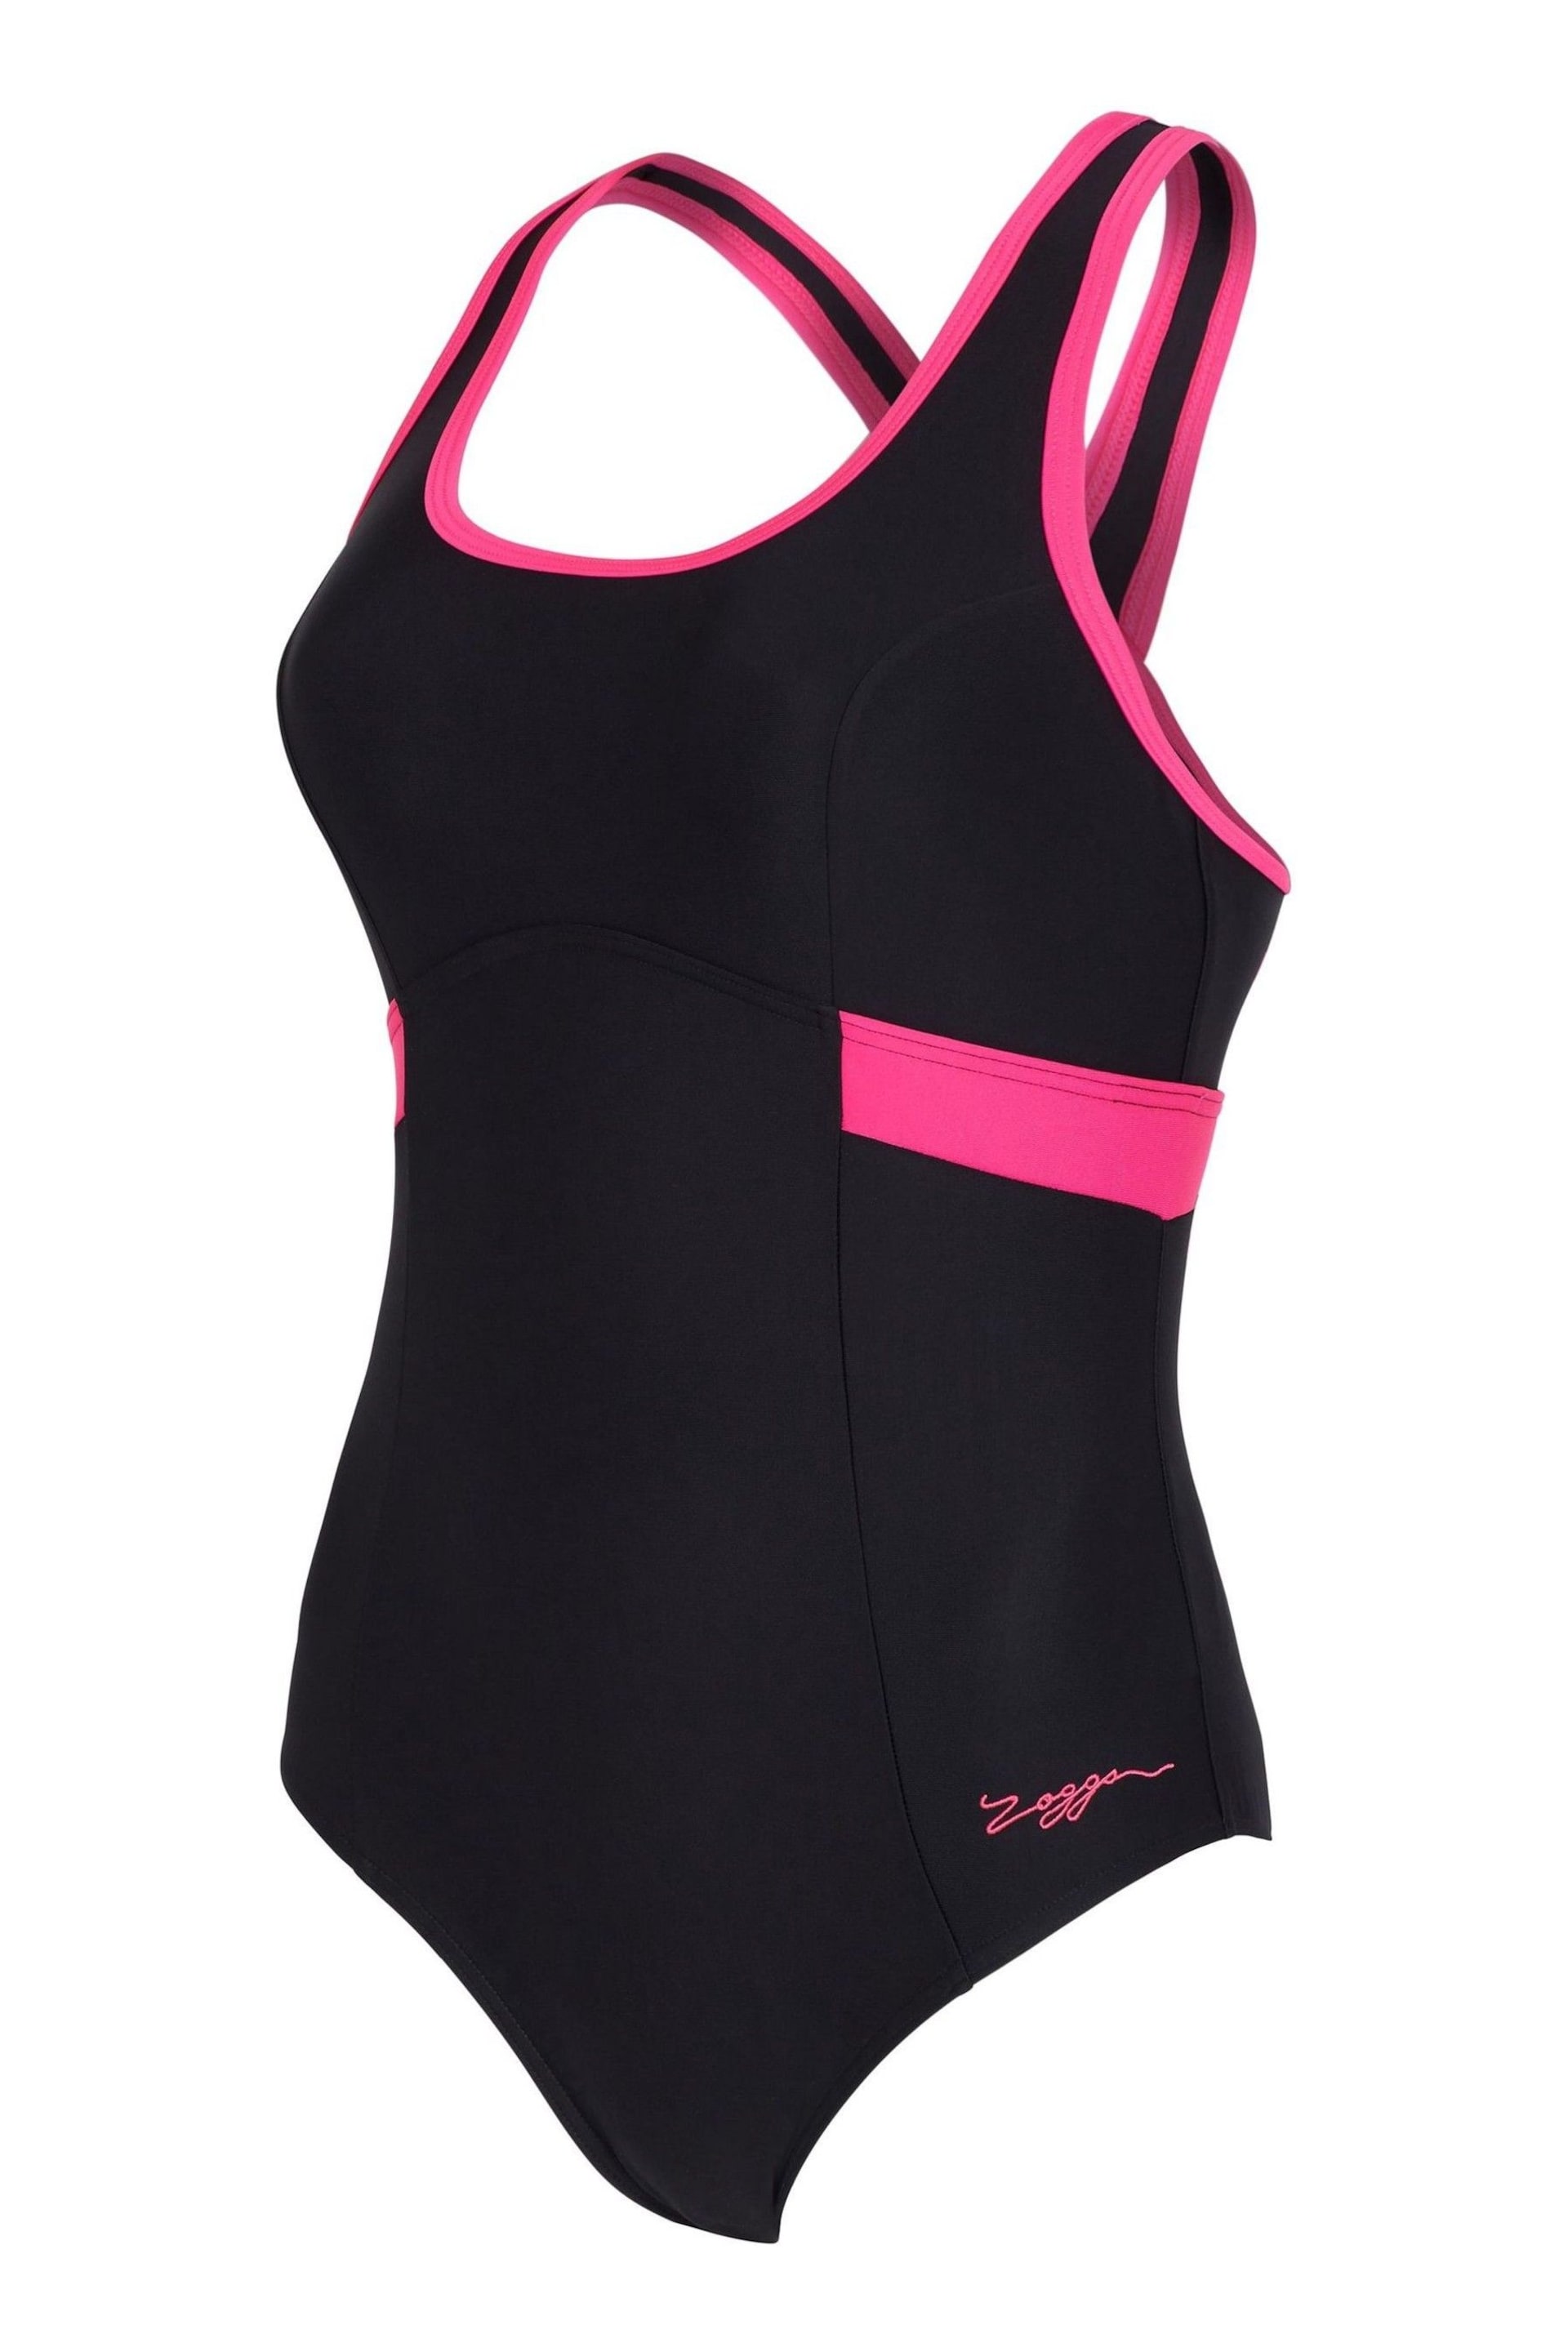 Zoggs Dakota Supportive Crossback One Piece Swimsuit - Image 8 of 11